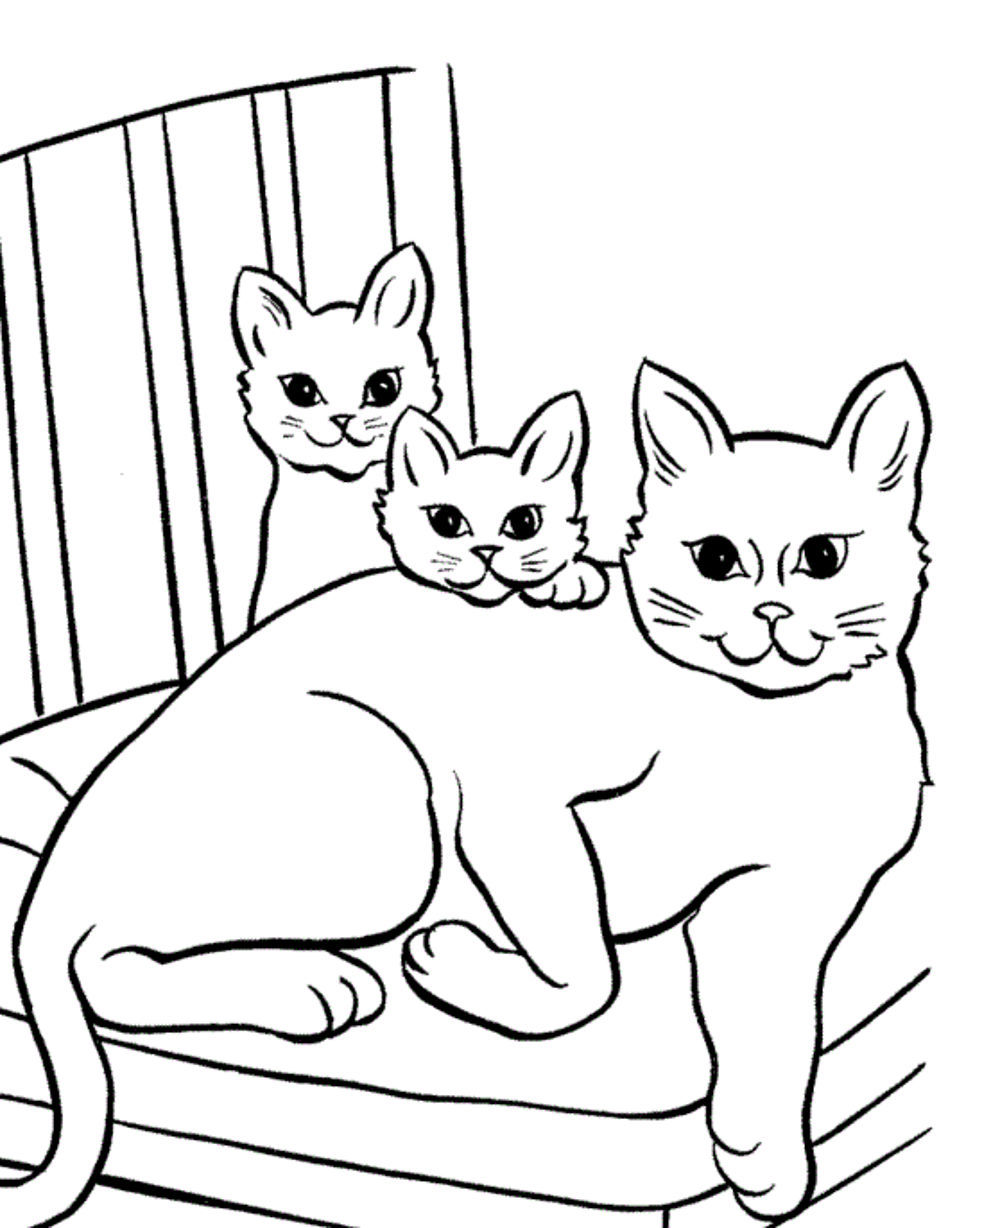 cat printable coloring pages     BestAppsForKids.com